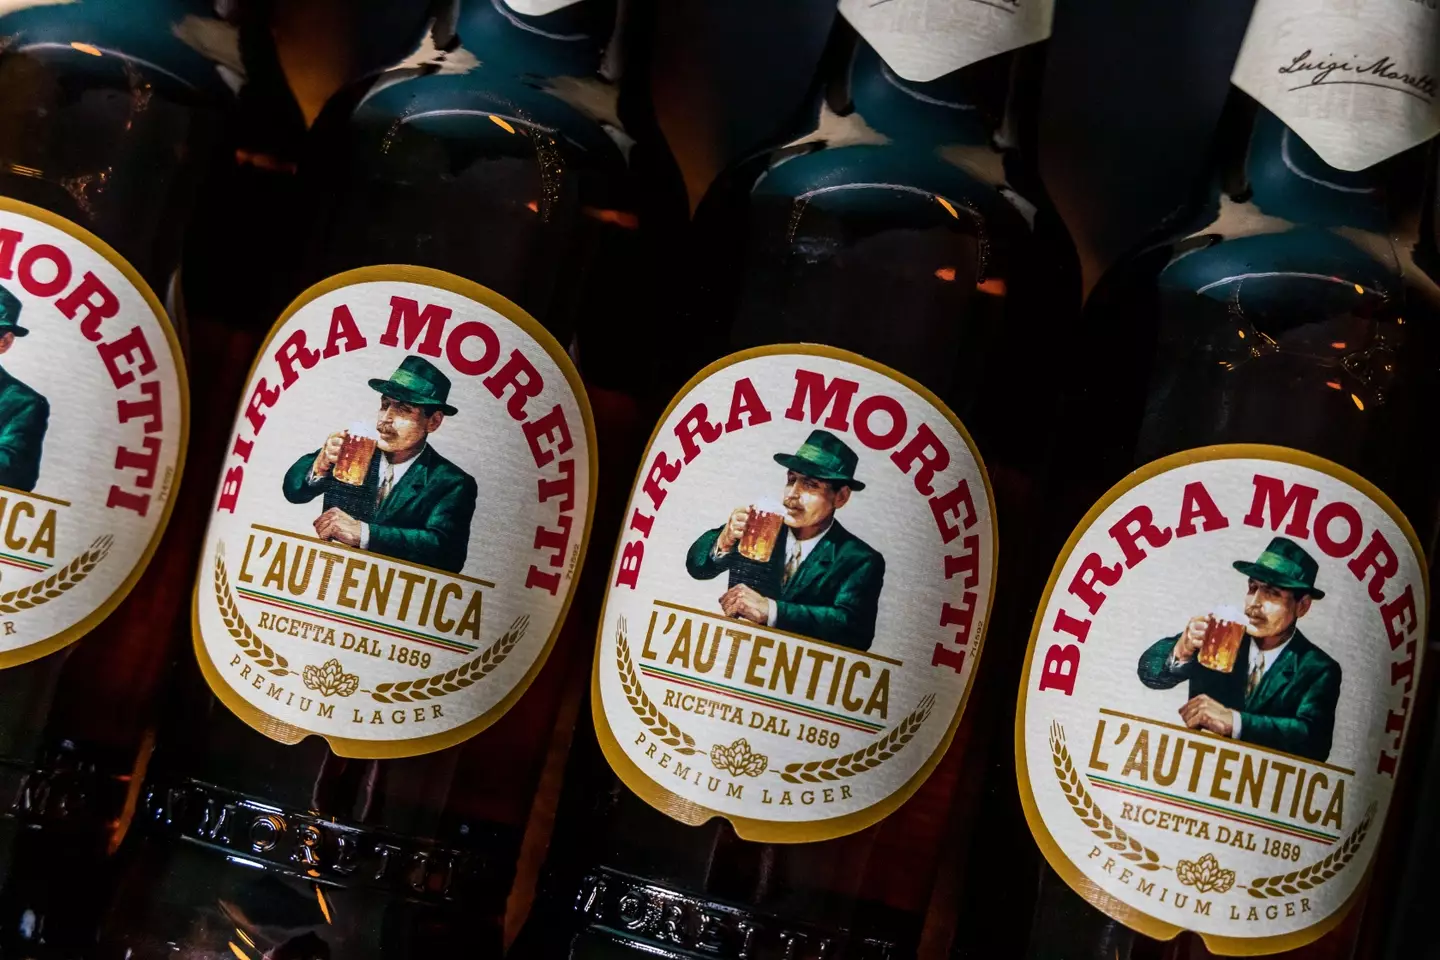 Birra Moretti is brewed over in the UK.